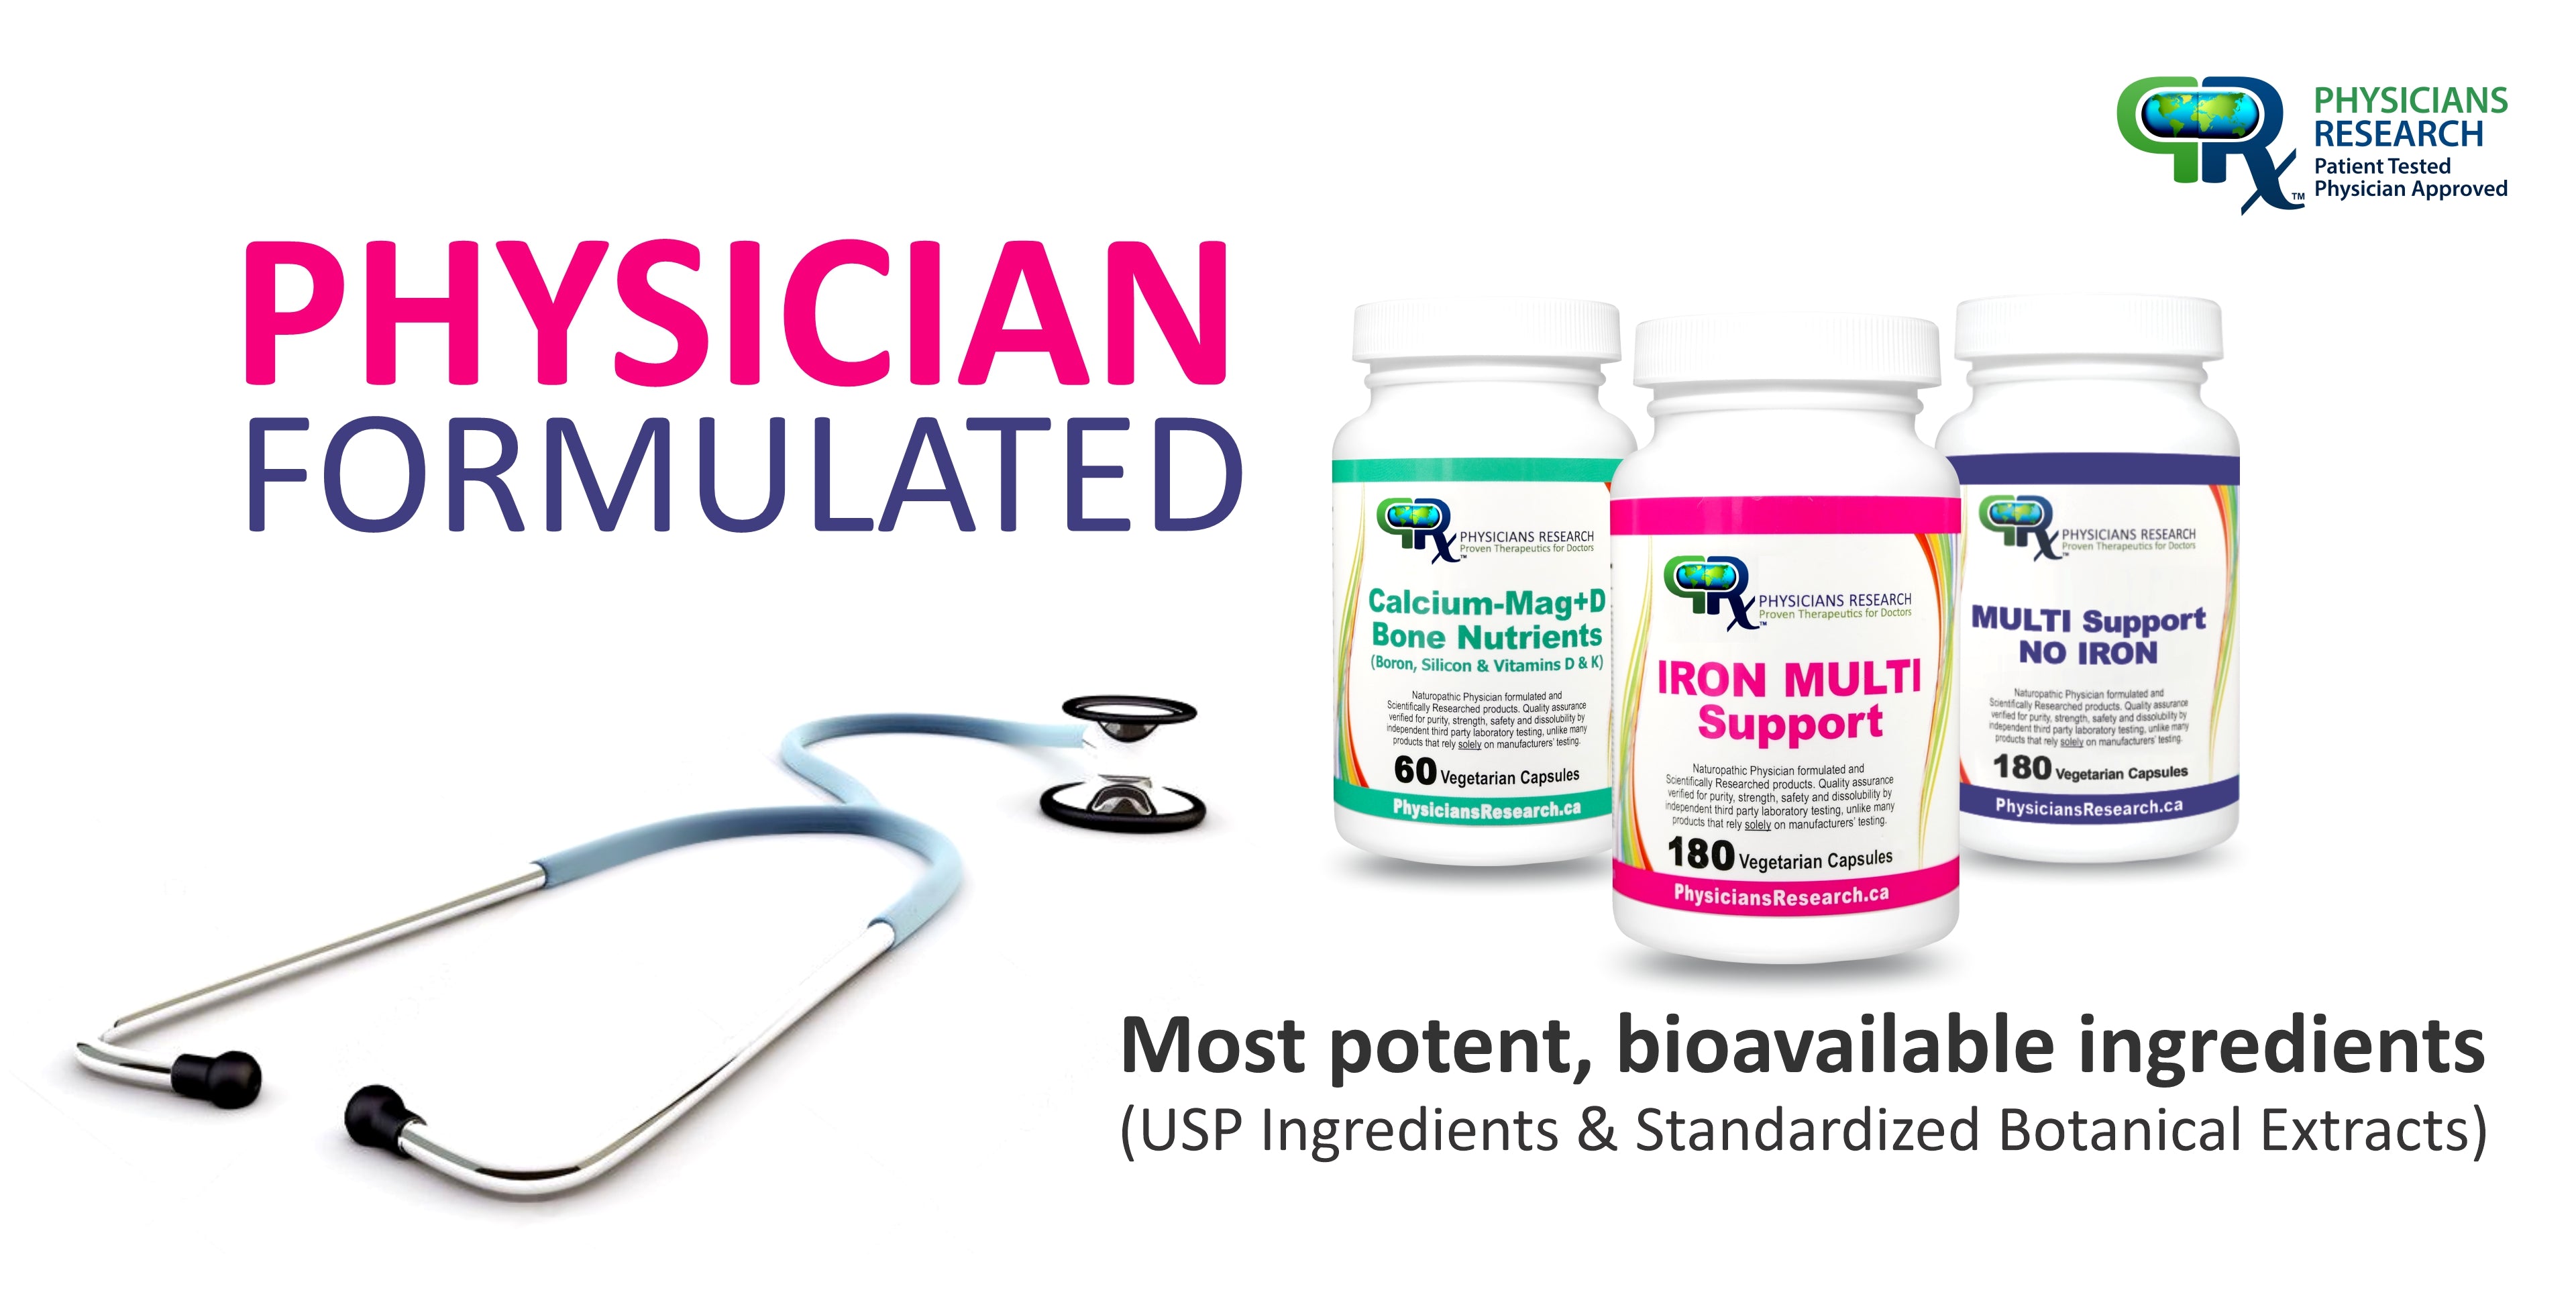 Physician Formulated, Most Potent, Bioavailable Ingredients (USP, Standardized Extracts)